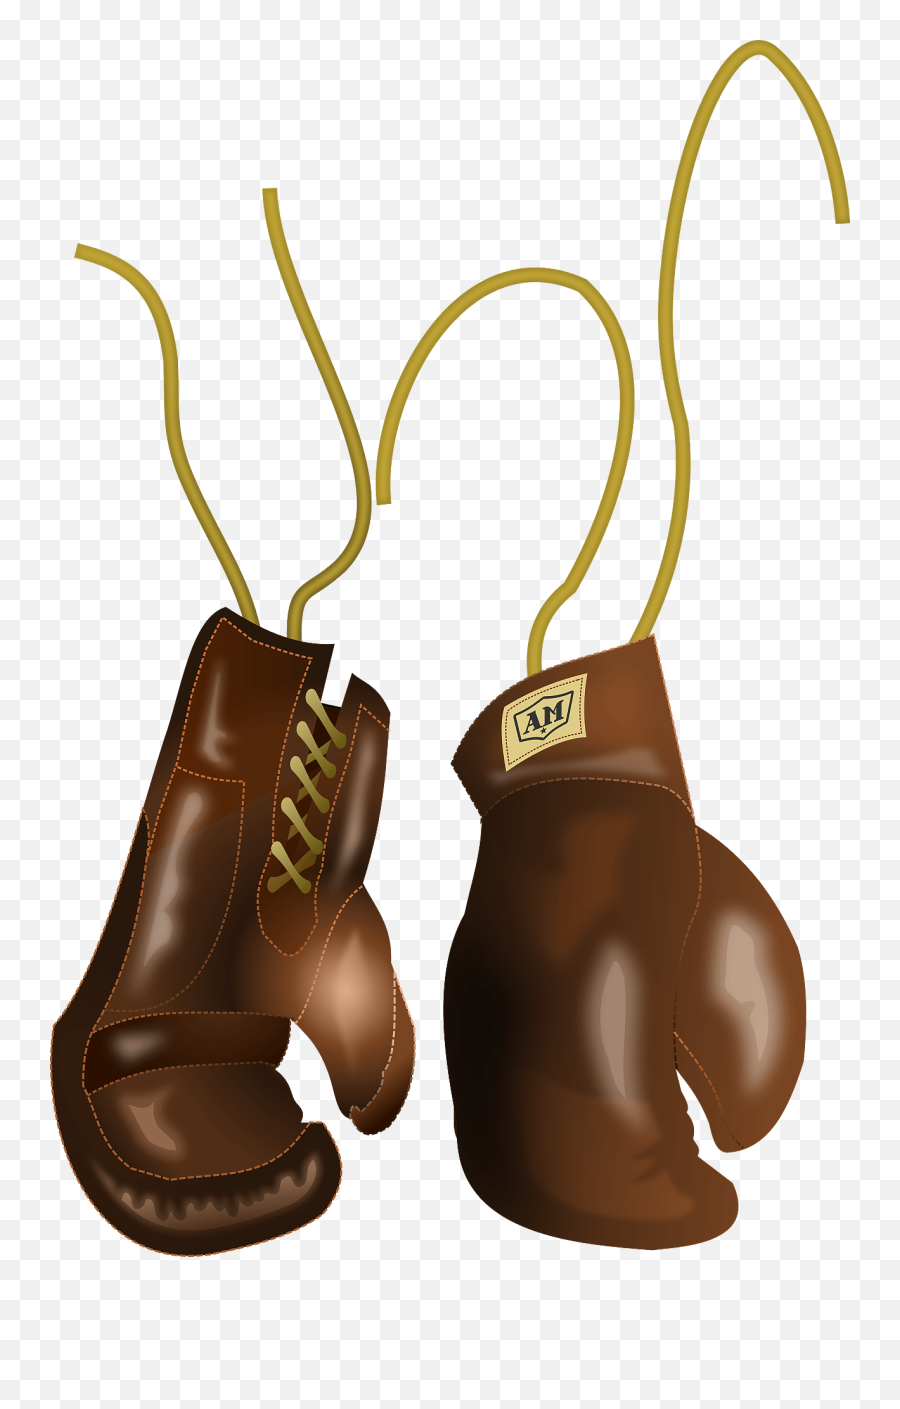 Vintage Leather Boxing Gloves Clipart - Boxing Gloves Leather Png Emoji,Boxing Glove Emoji